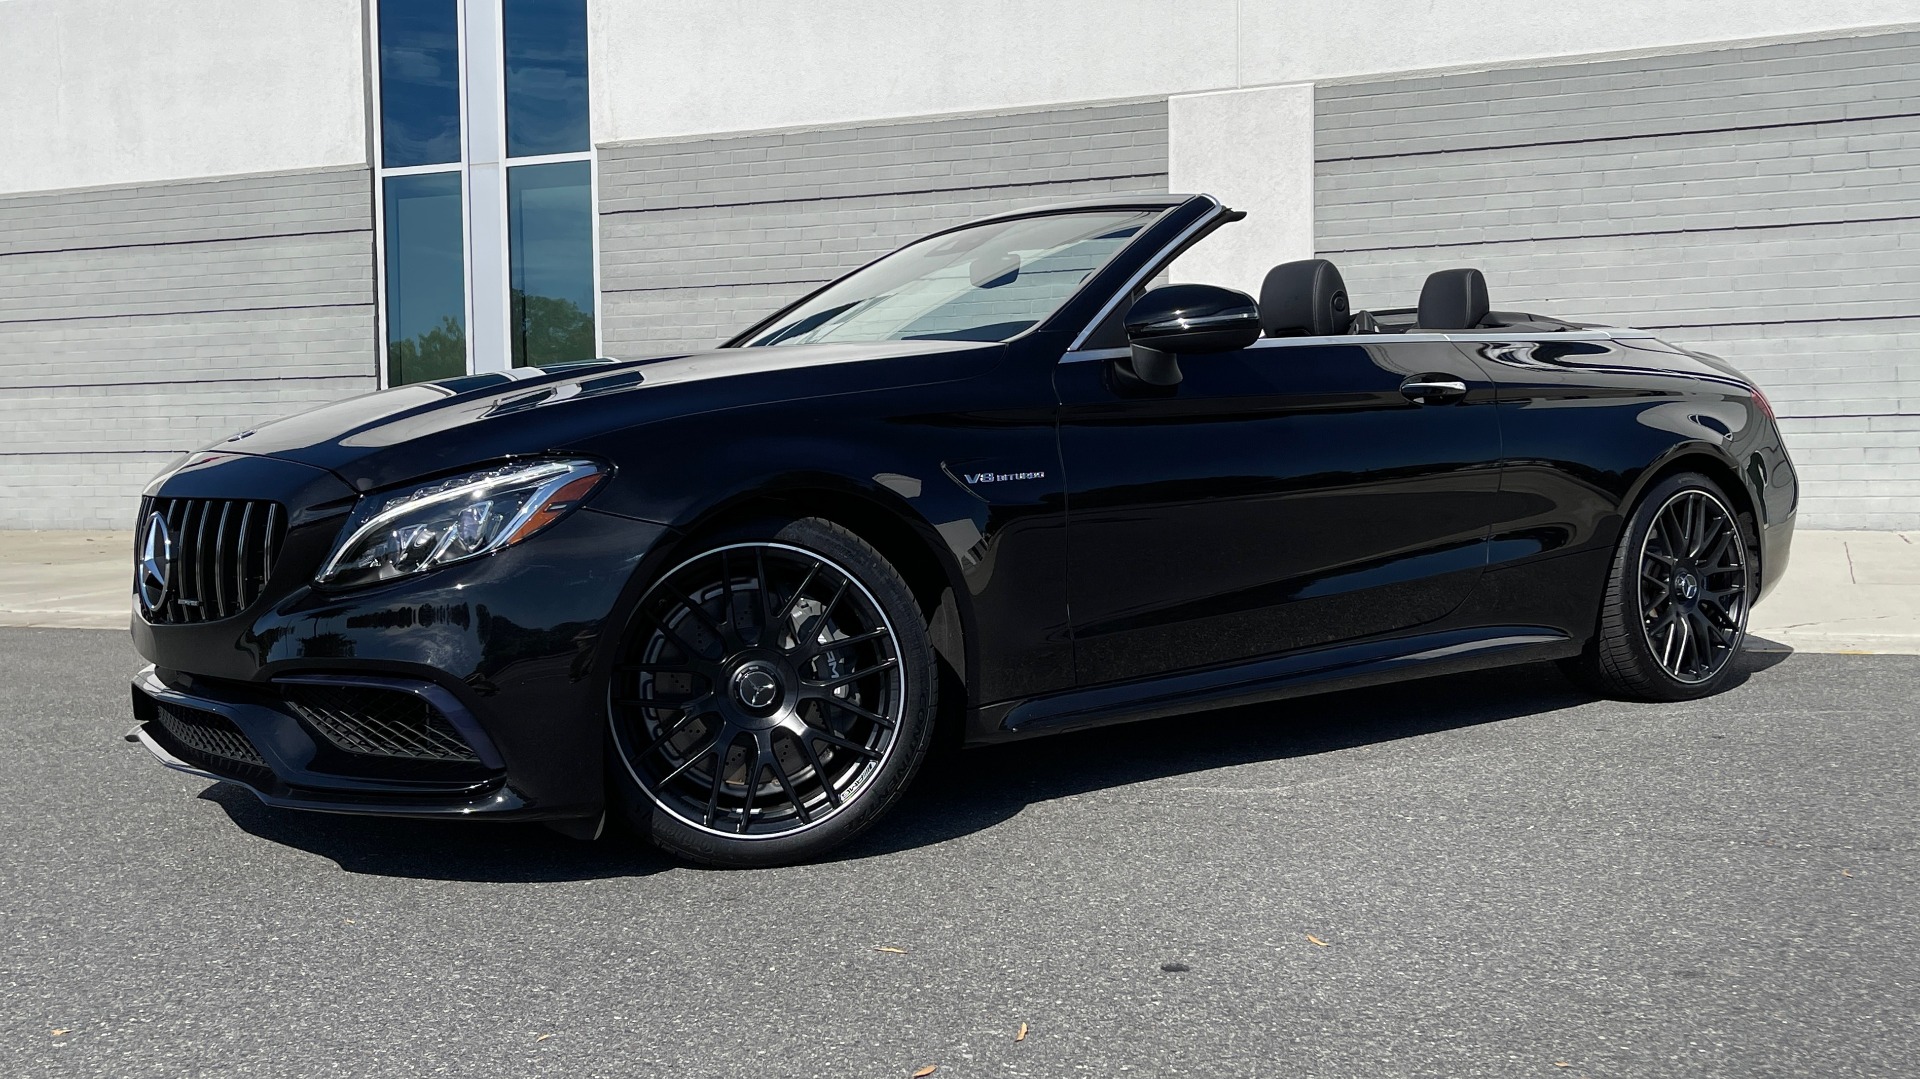 Used 2018 Mercedes-Benz C-CLASS AMG C 63 CAB / PREMIUM / LIGHTING / NIGHT PKG / PERF EXHAUST for sale Sold at Formula Imports in Charlotte NC 28227 2